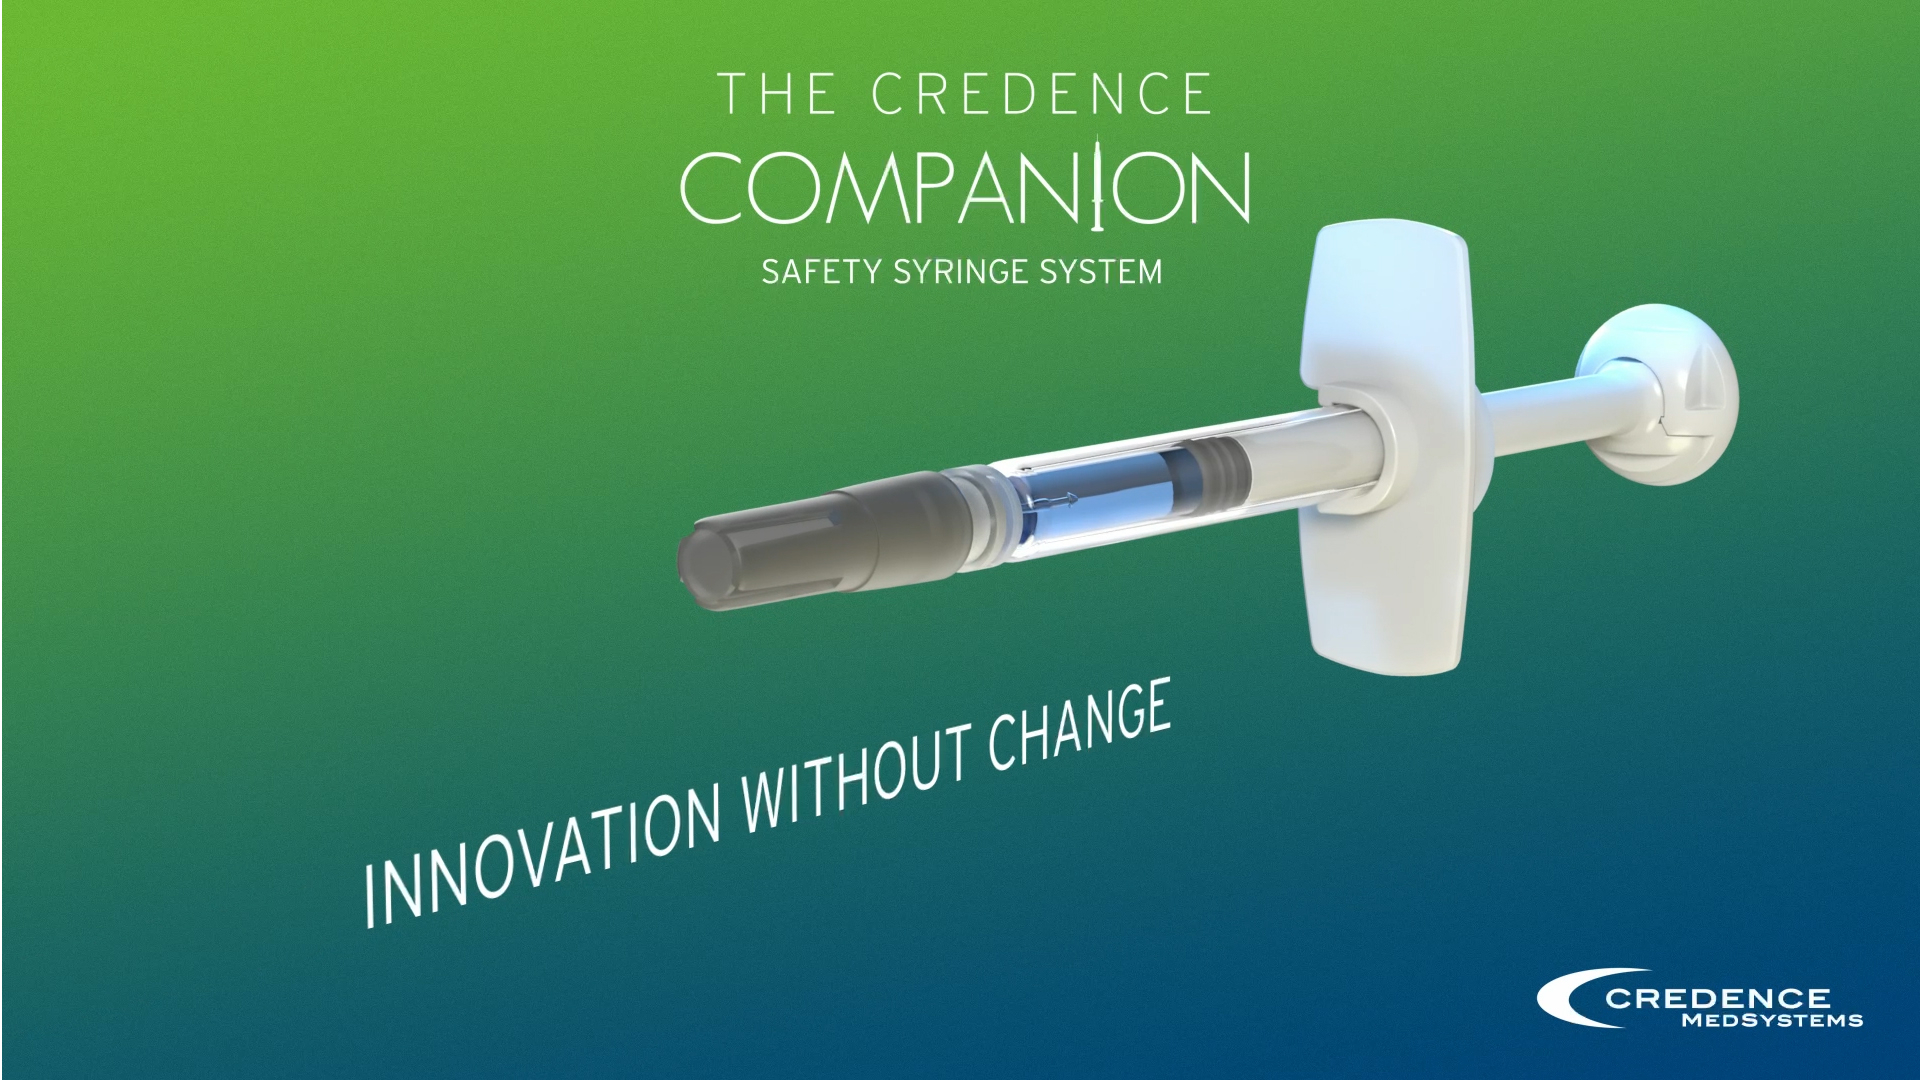 Credence's drug delivery devices address industry challenges in injectable drug delivery, while maintaining use of off-the-shelf syringe barrels and other primary package components in order to facilitate implementation for its pharma customers.